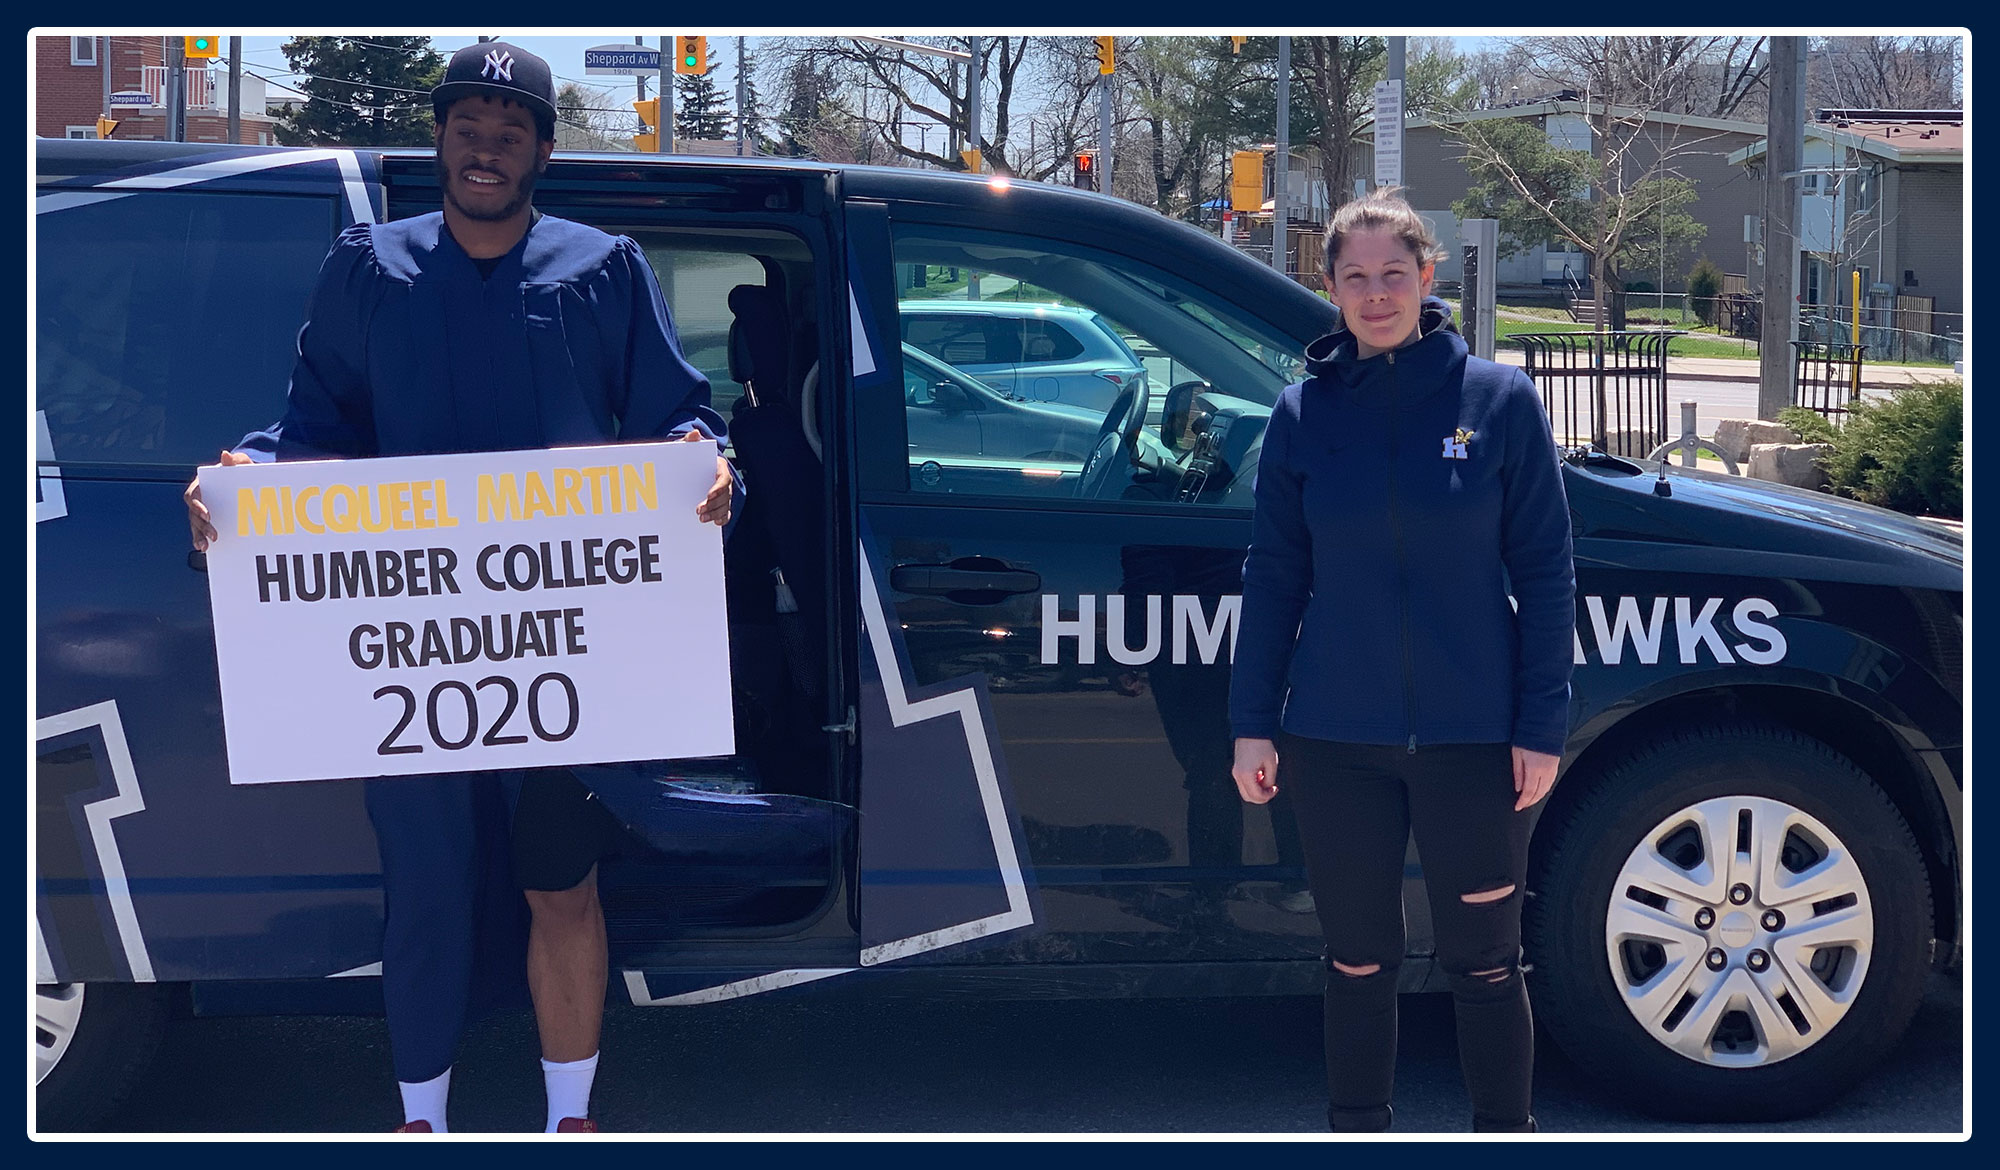 Micqueel and Mallory standing in front of the Humber van, celebrating his graduation